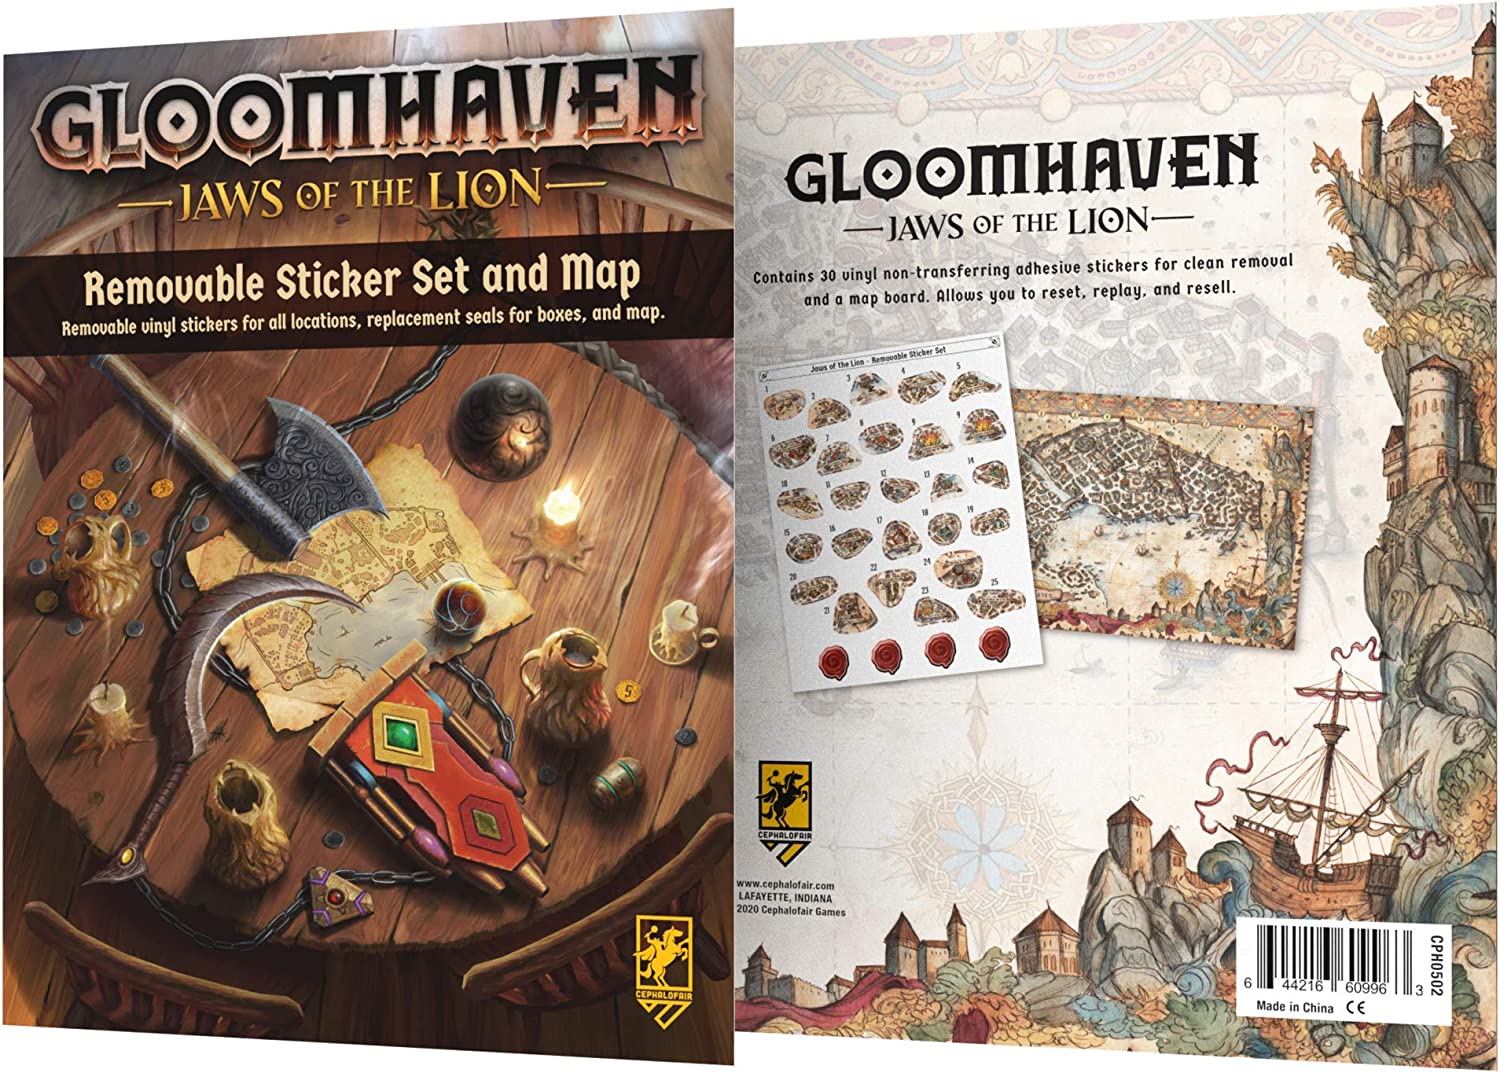 Køb Gloomhaven: Jaws of the Lion - Removable Sticker Set and Map spil - Pris 71.00 kr.